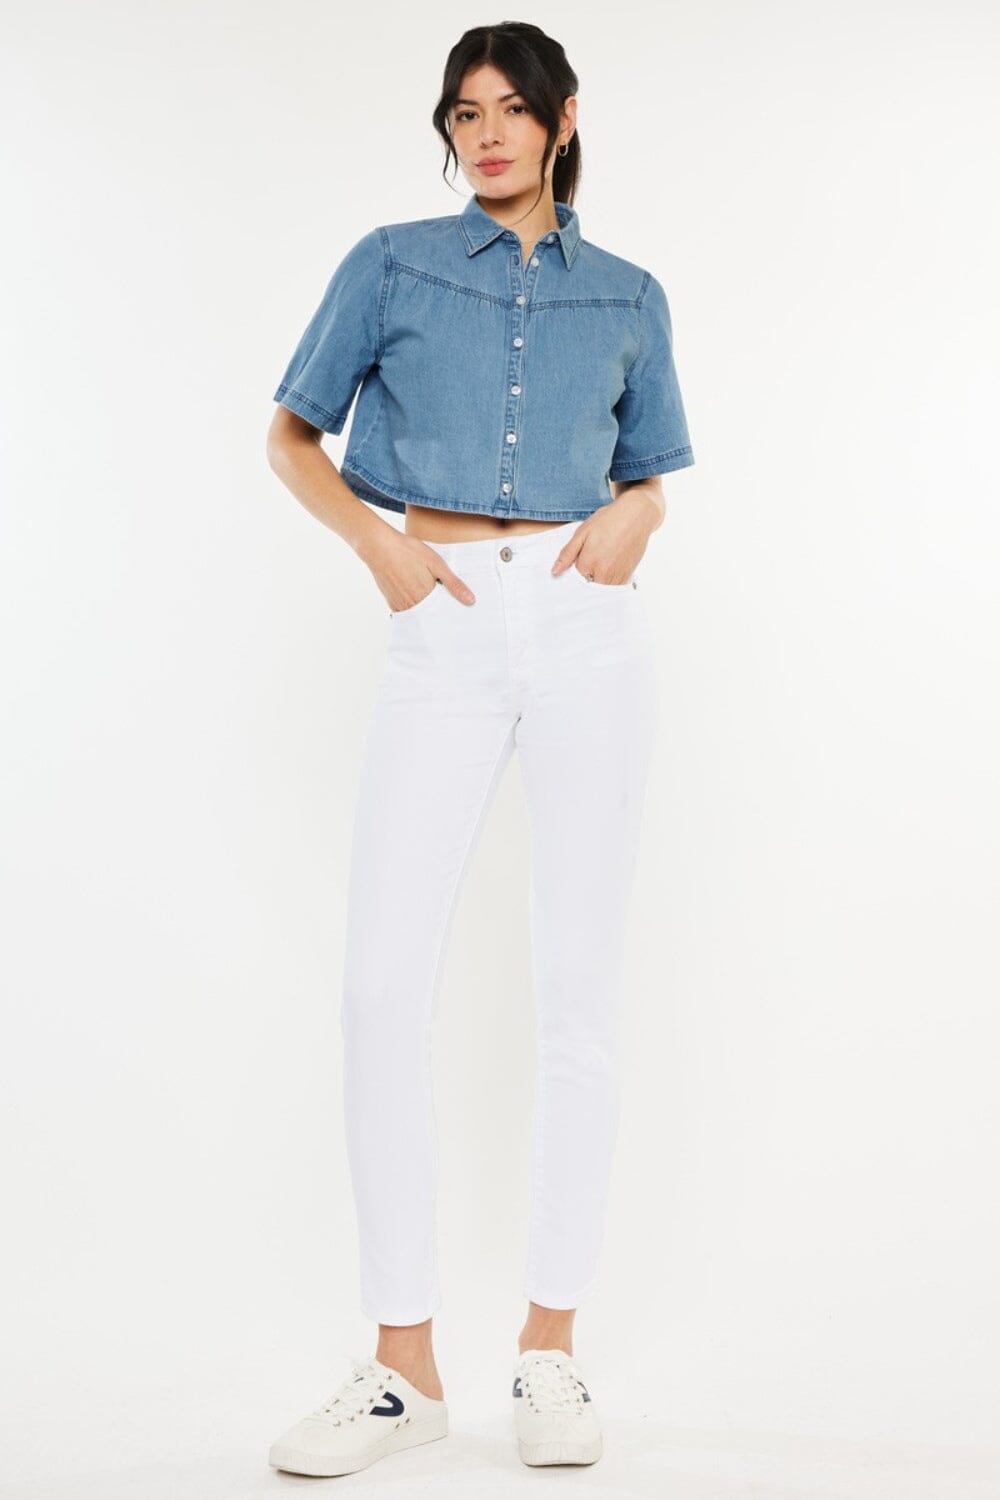 Kancan White High Rise Ankle Skinny Jeans jeans jehouze White 0 